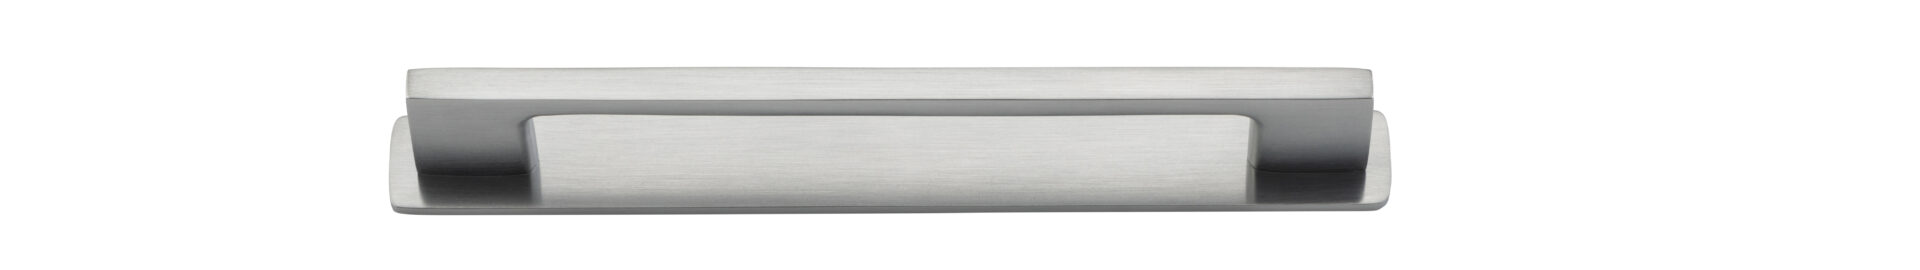 0536B - Cali Cabinet Pull with Backplate - CTC 160mm - Brushed Chrome